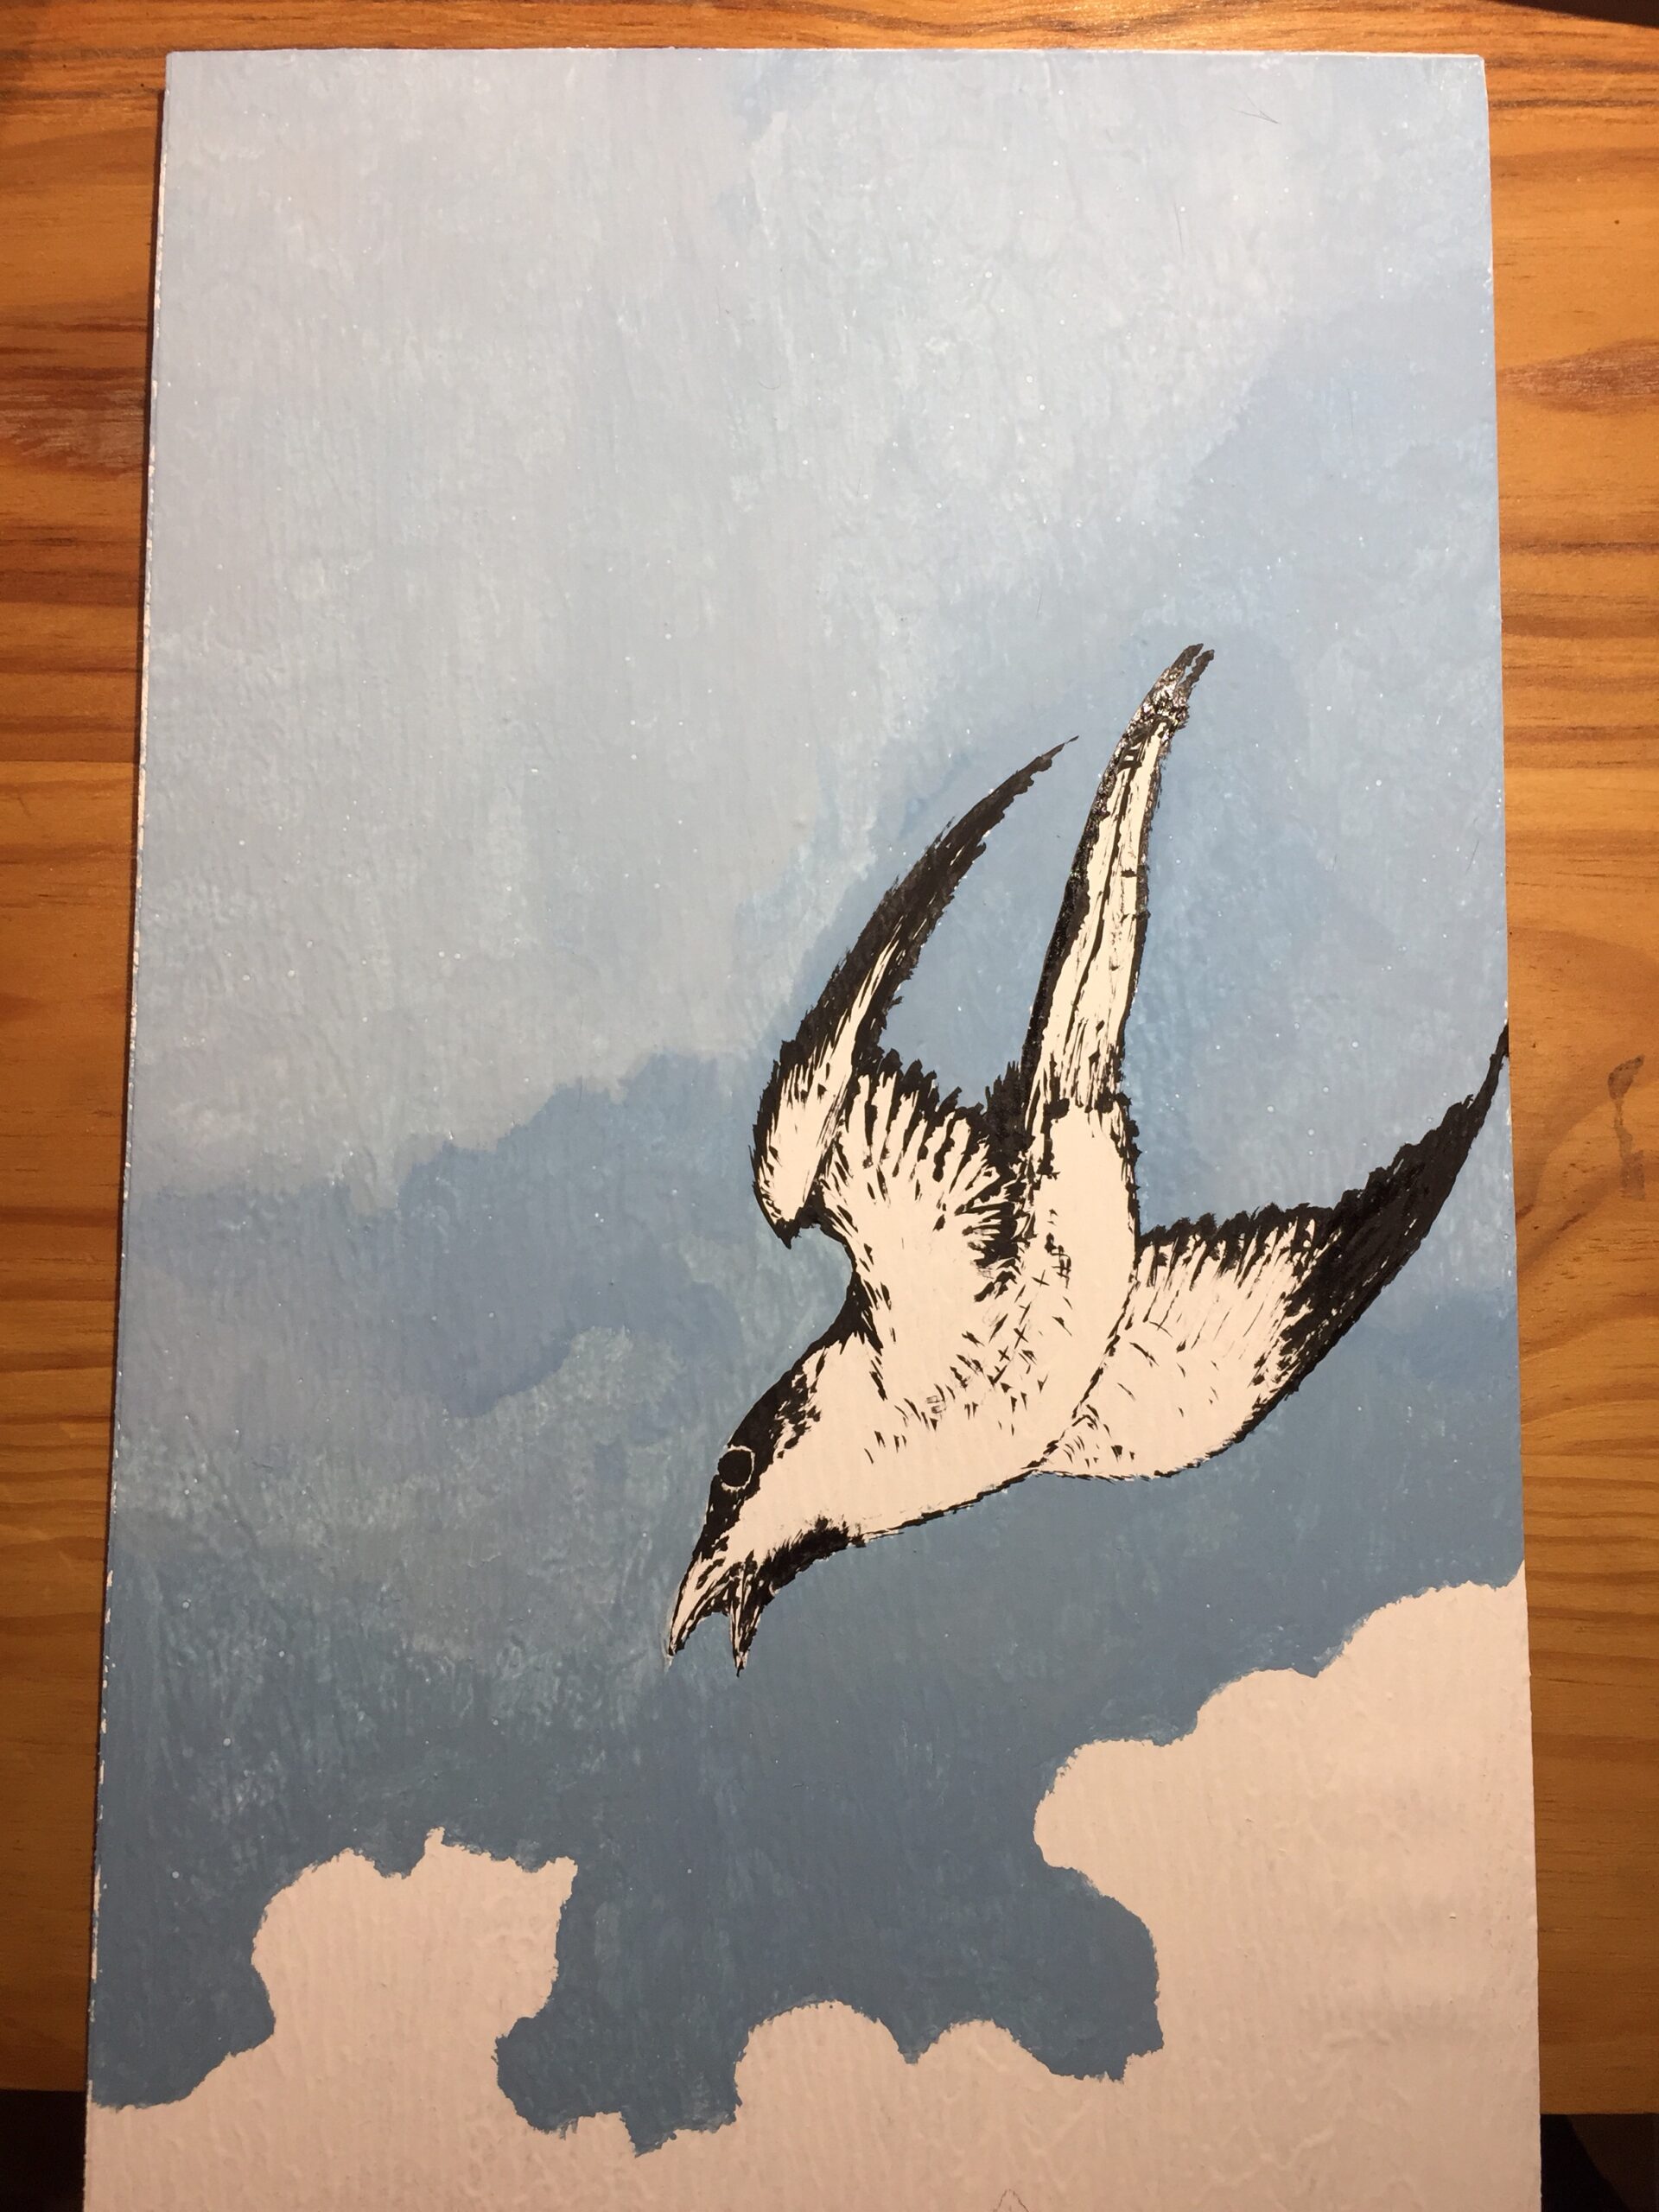 Photo of the part of the board that shows the cuckoo flying downwards which I painted black, and the sky painted in shades of blue over white clouds